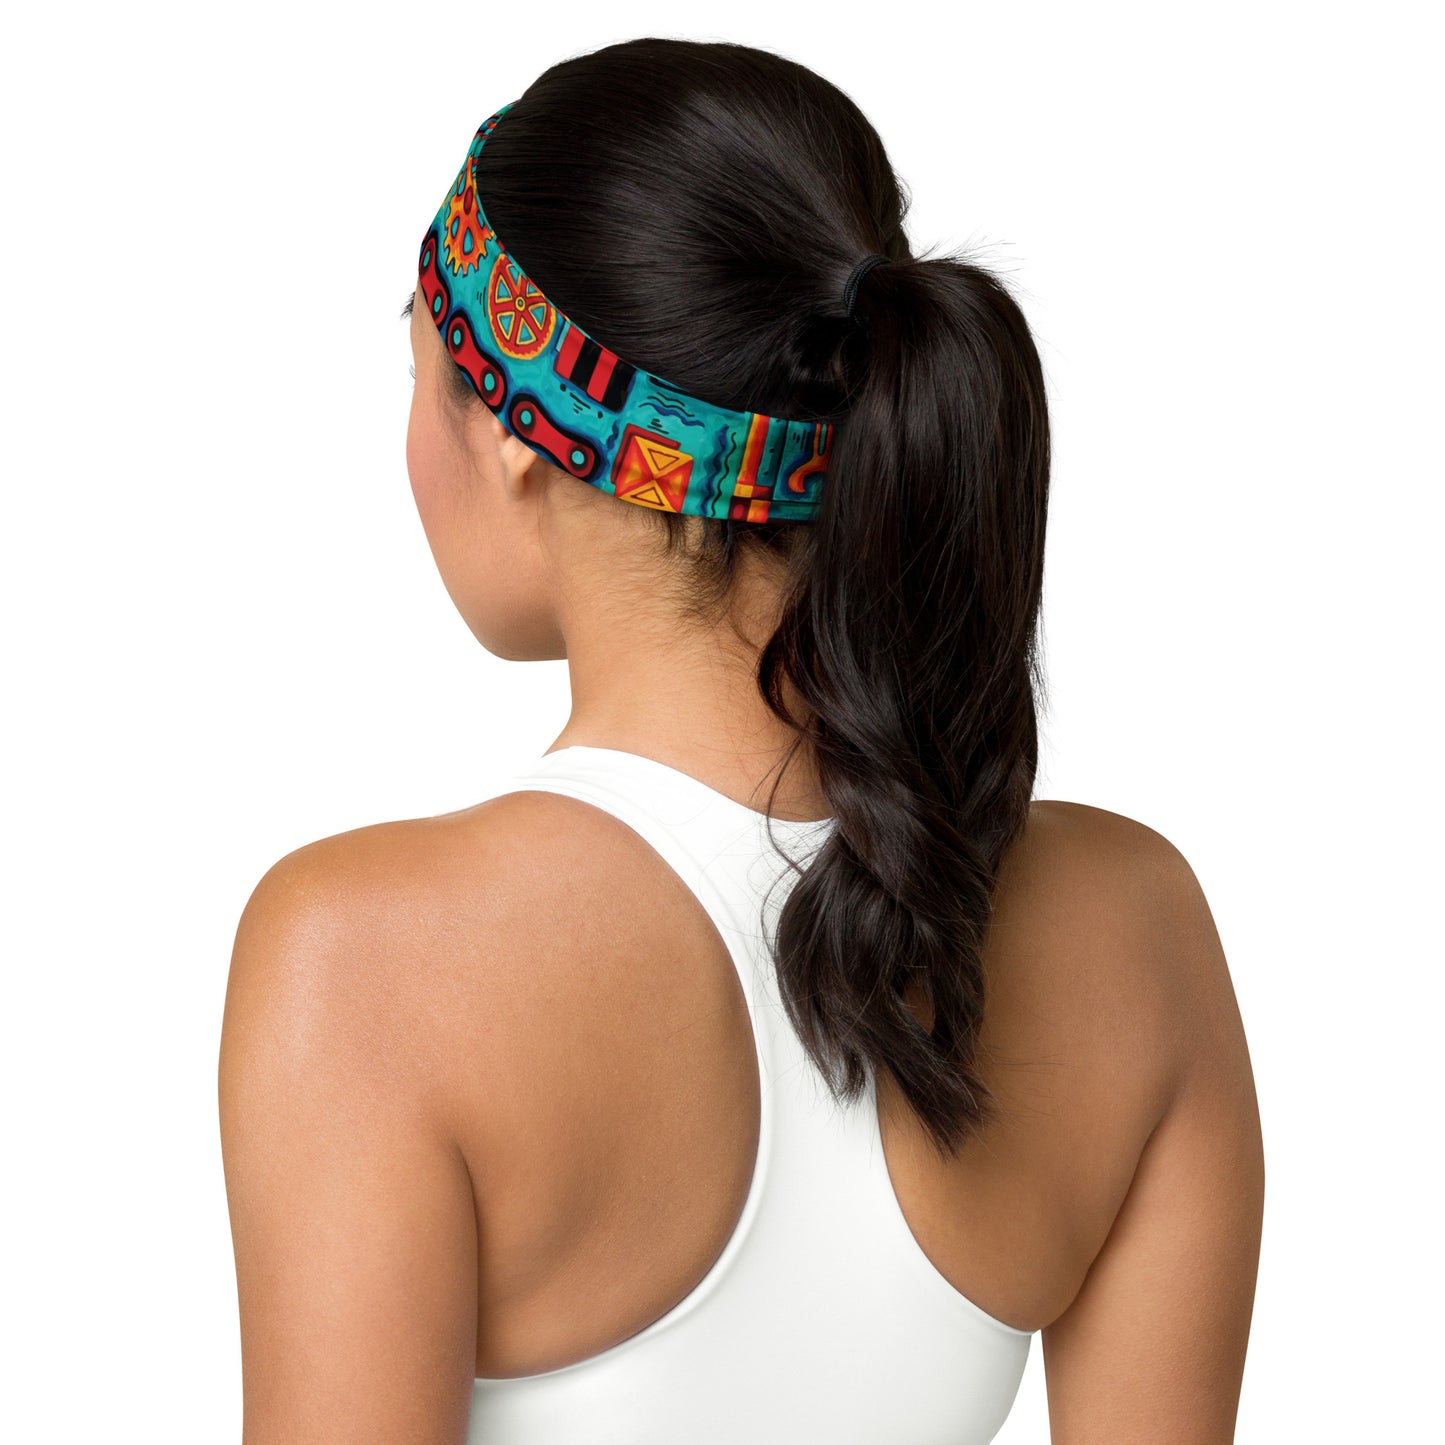 aroon brand cycling headband in reds, oranges and teal featuring a unique fun design of cycling chains gears and more